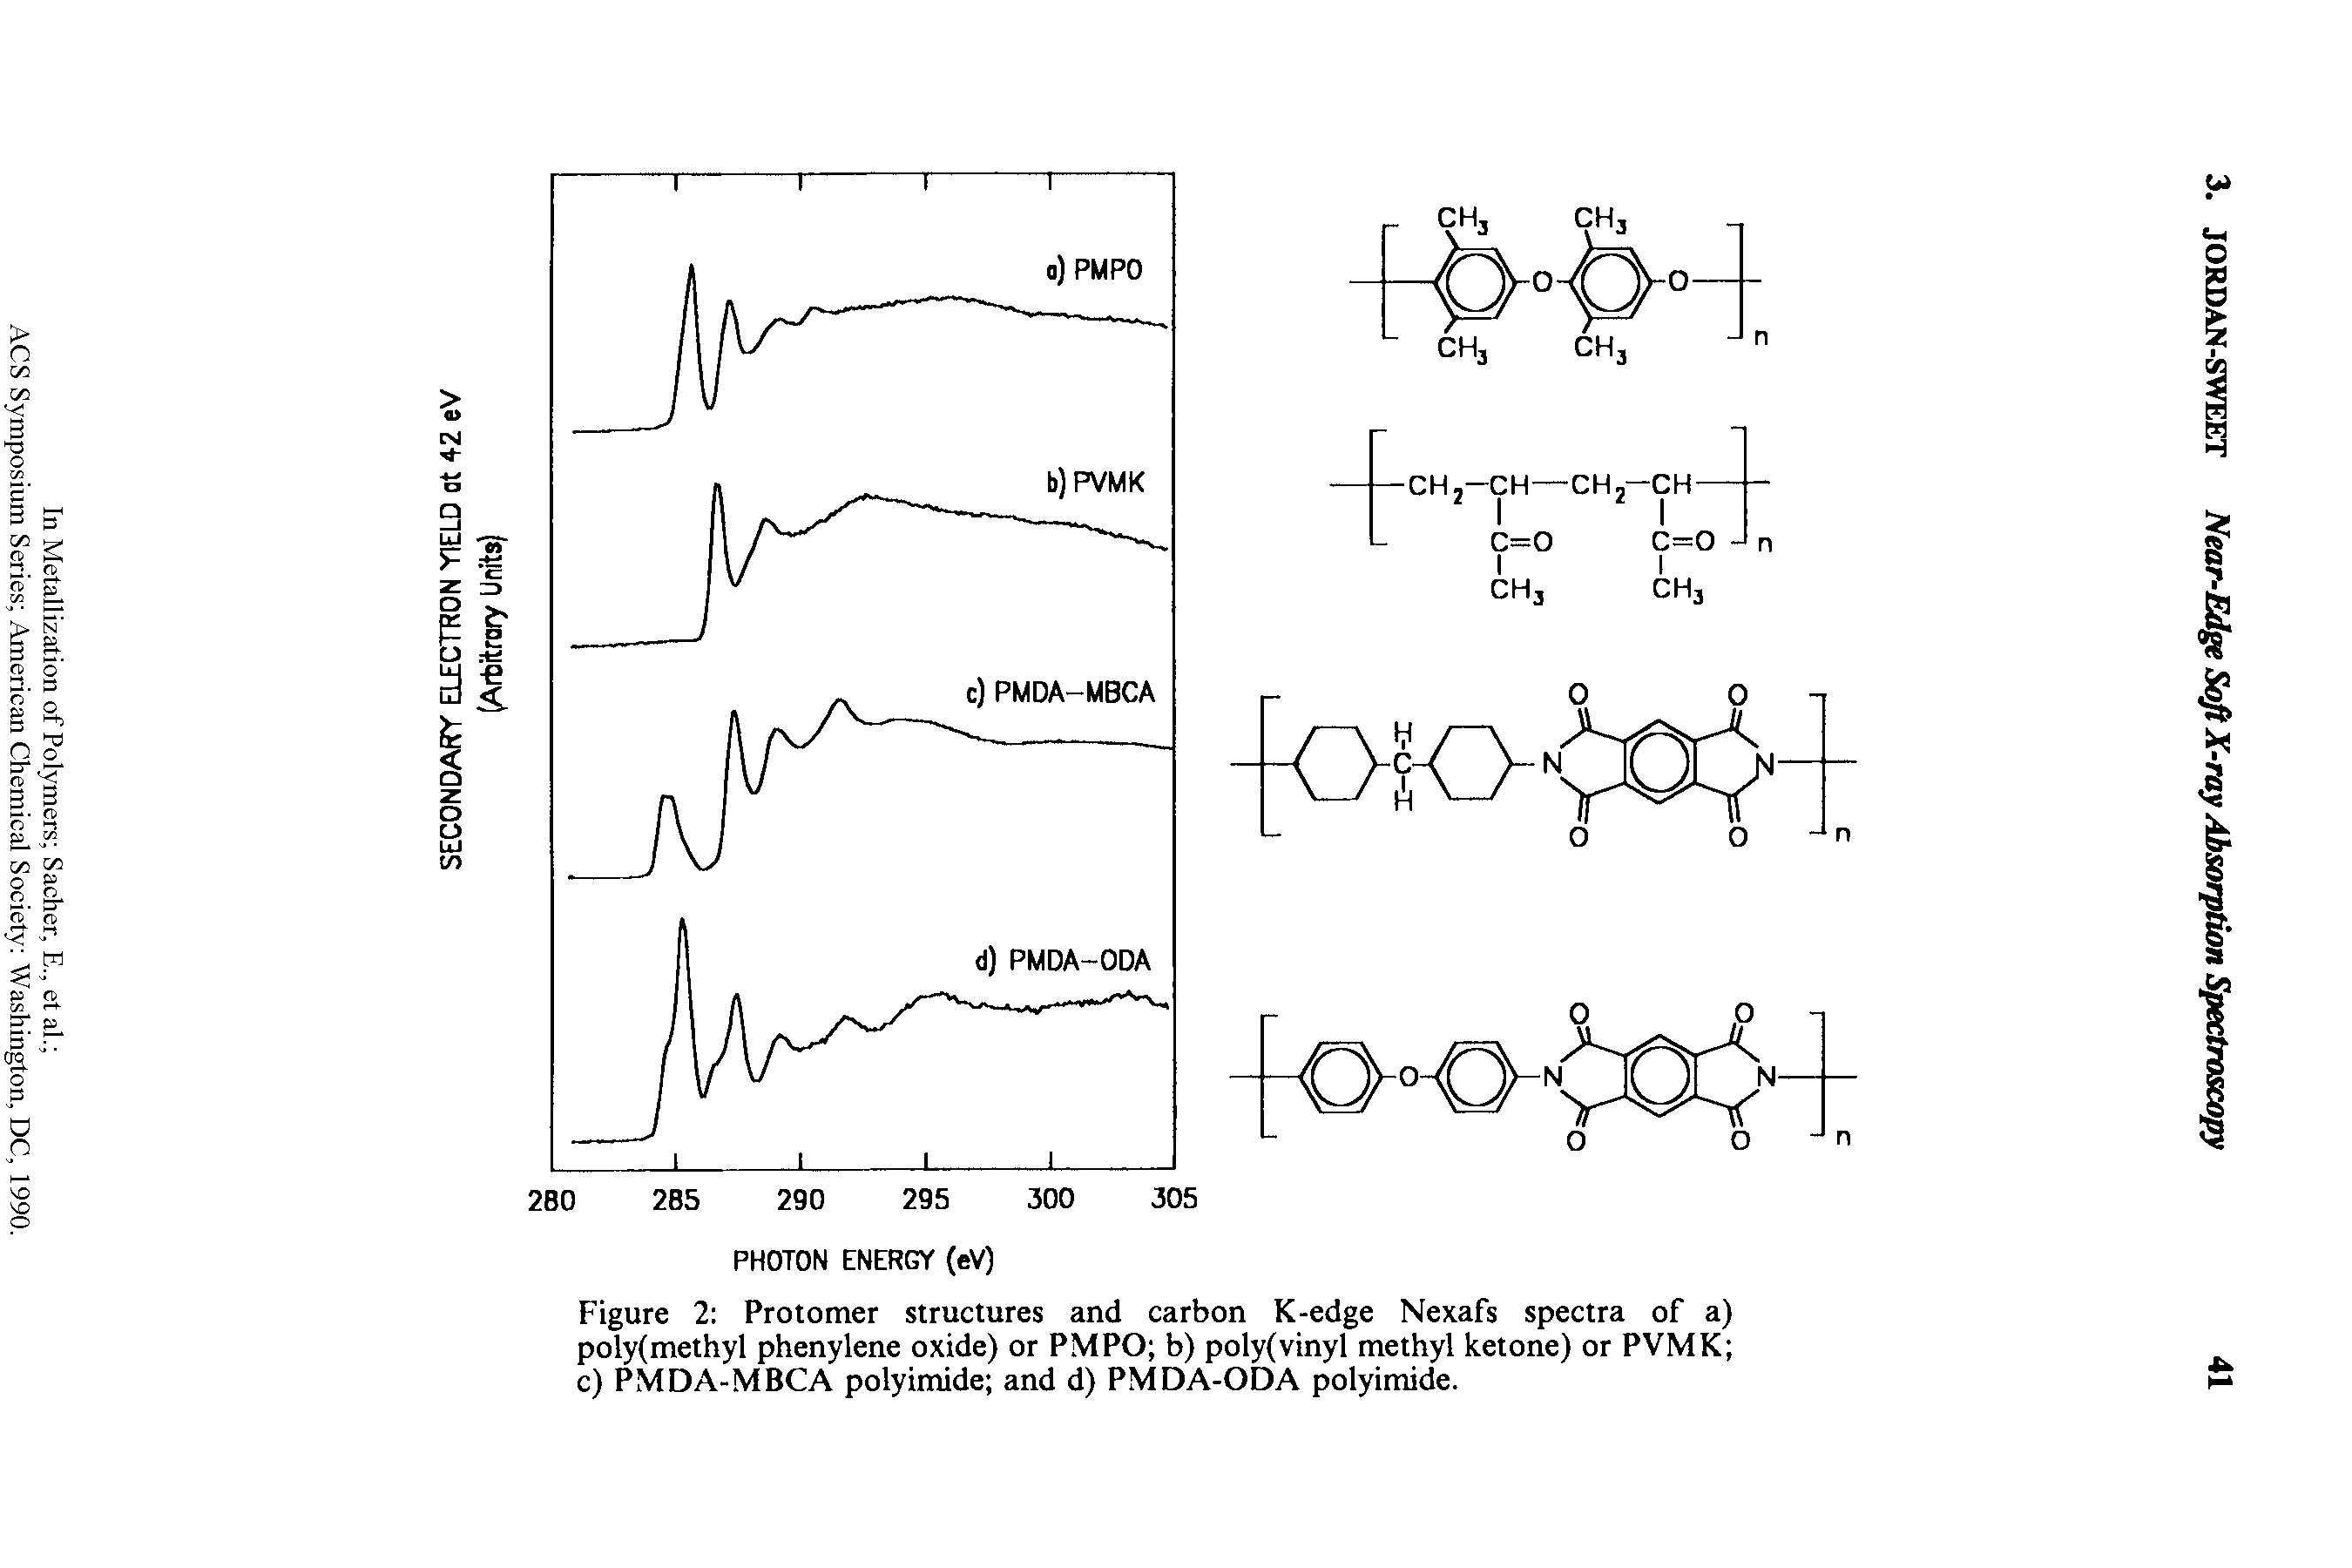 Figure 2 Protomer structures and carbon K-edge Nexafs spectra of a) poly(methyl phenylene oxide) or PMPO b) poly(vinyl methyl ketone) or PVMK c) PMDA-MBCA polyimide and d) PMDA-ODA polyimide.